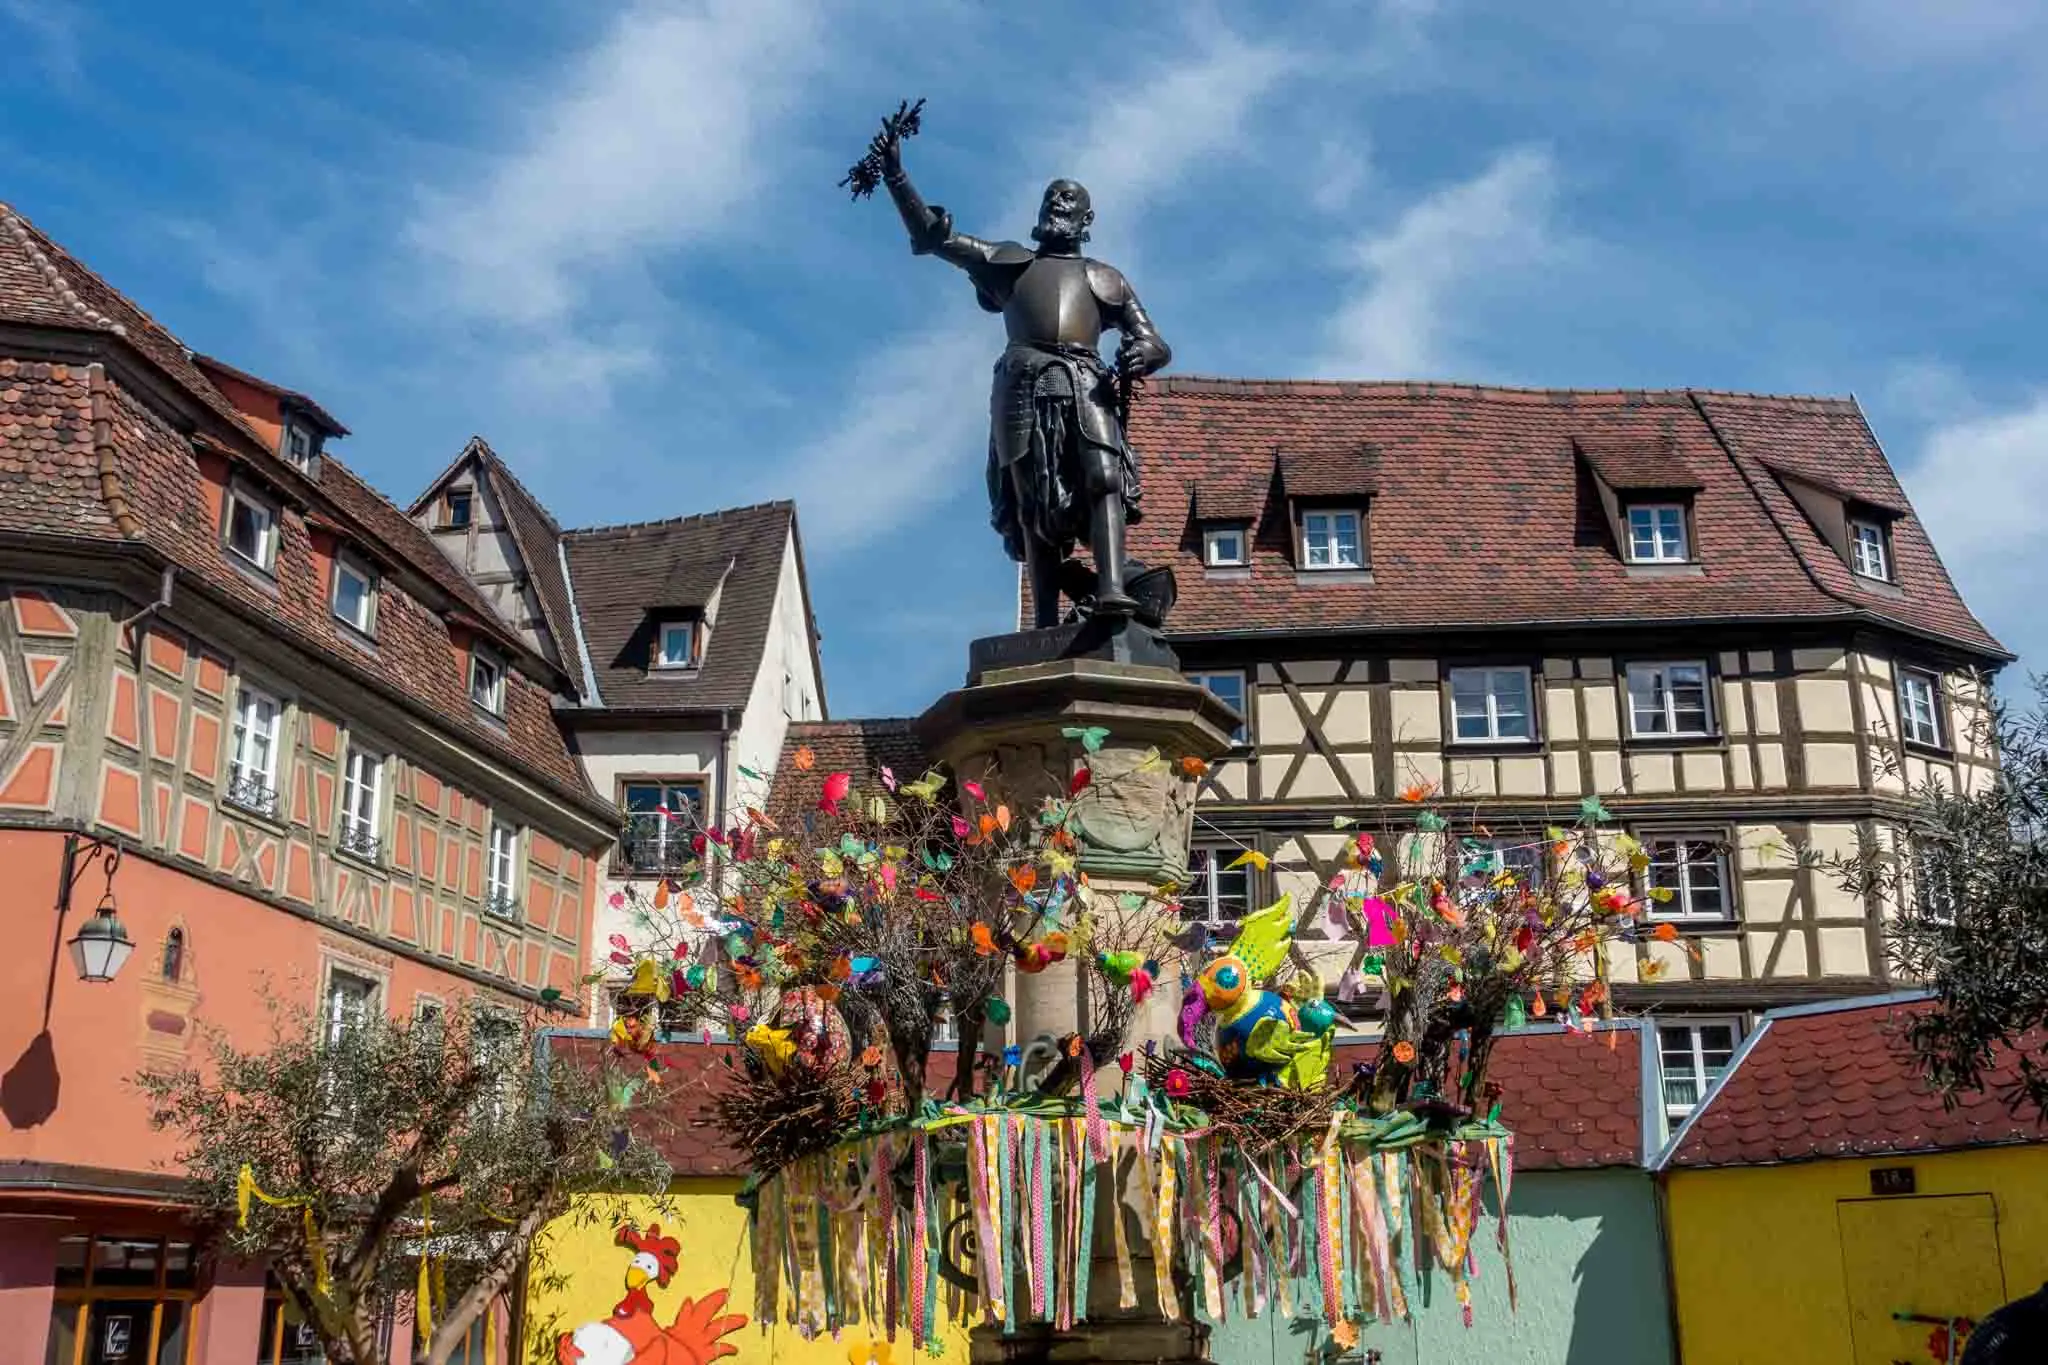 The Schwendi fountain in Colmar, France, decorated for Easter